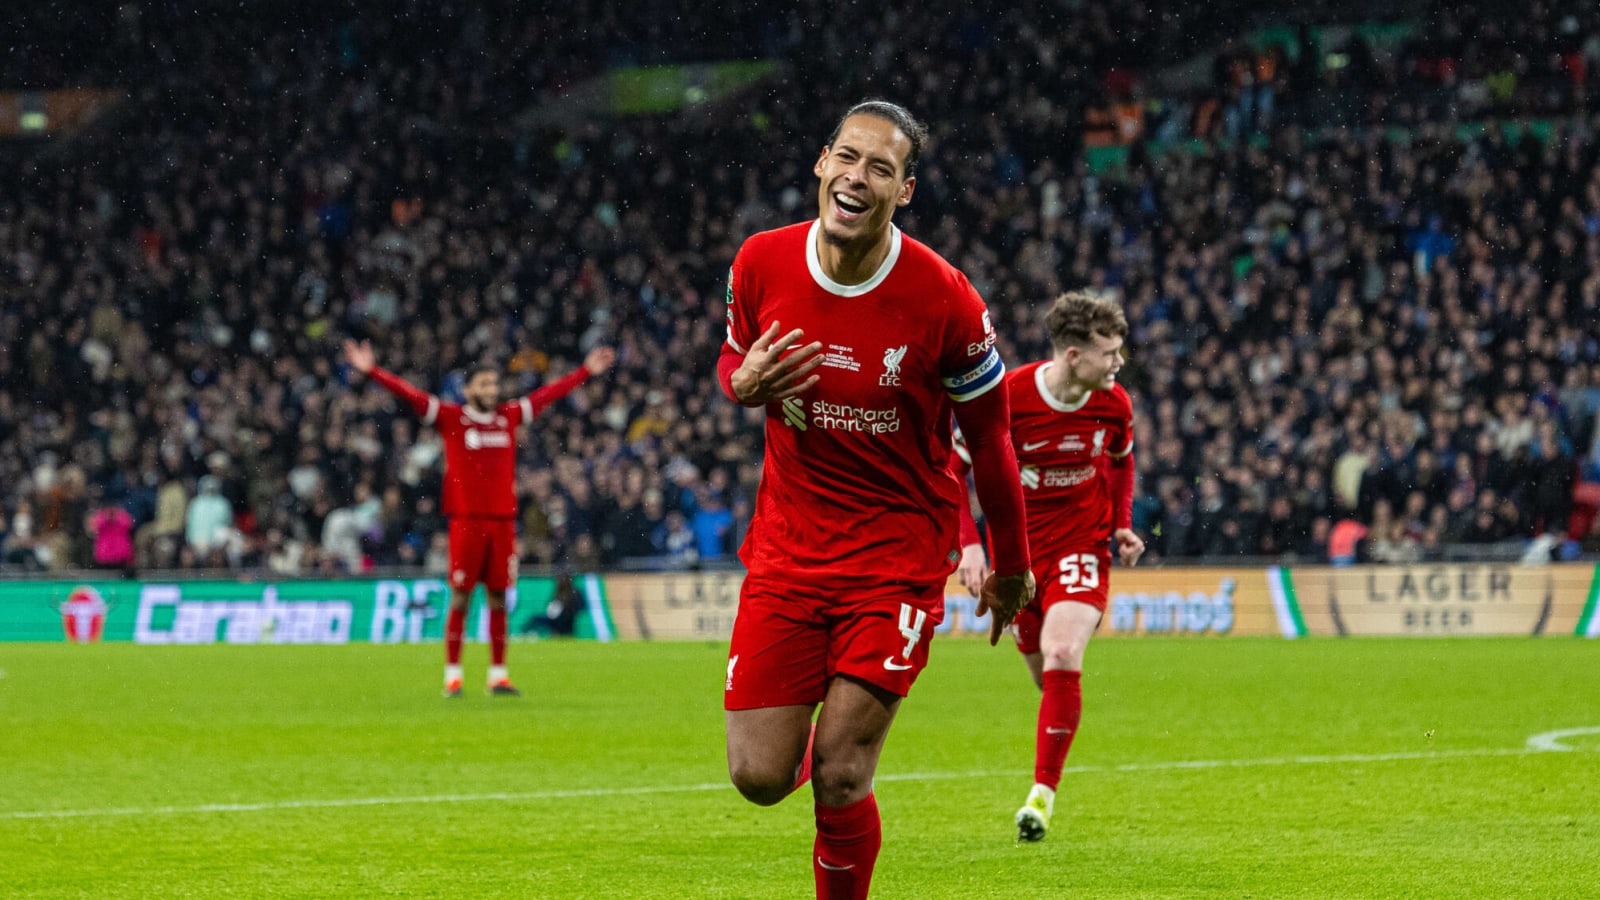 ‘What a player’ – Jude Bellingham impressed with Liverpool star after Carabao Cup win